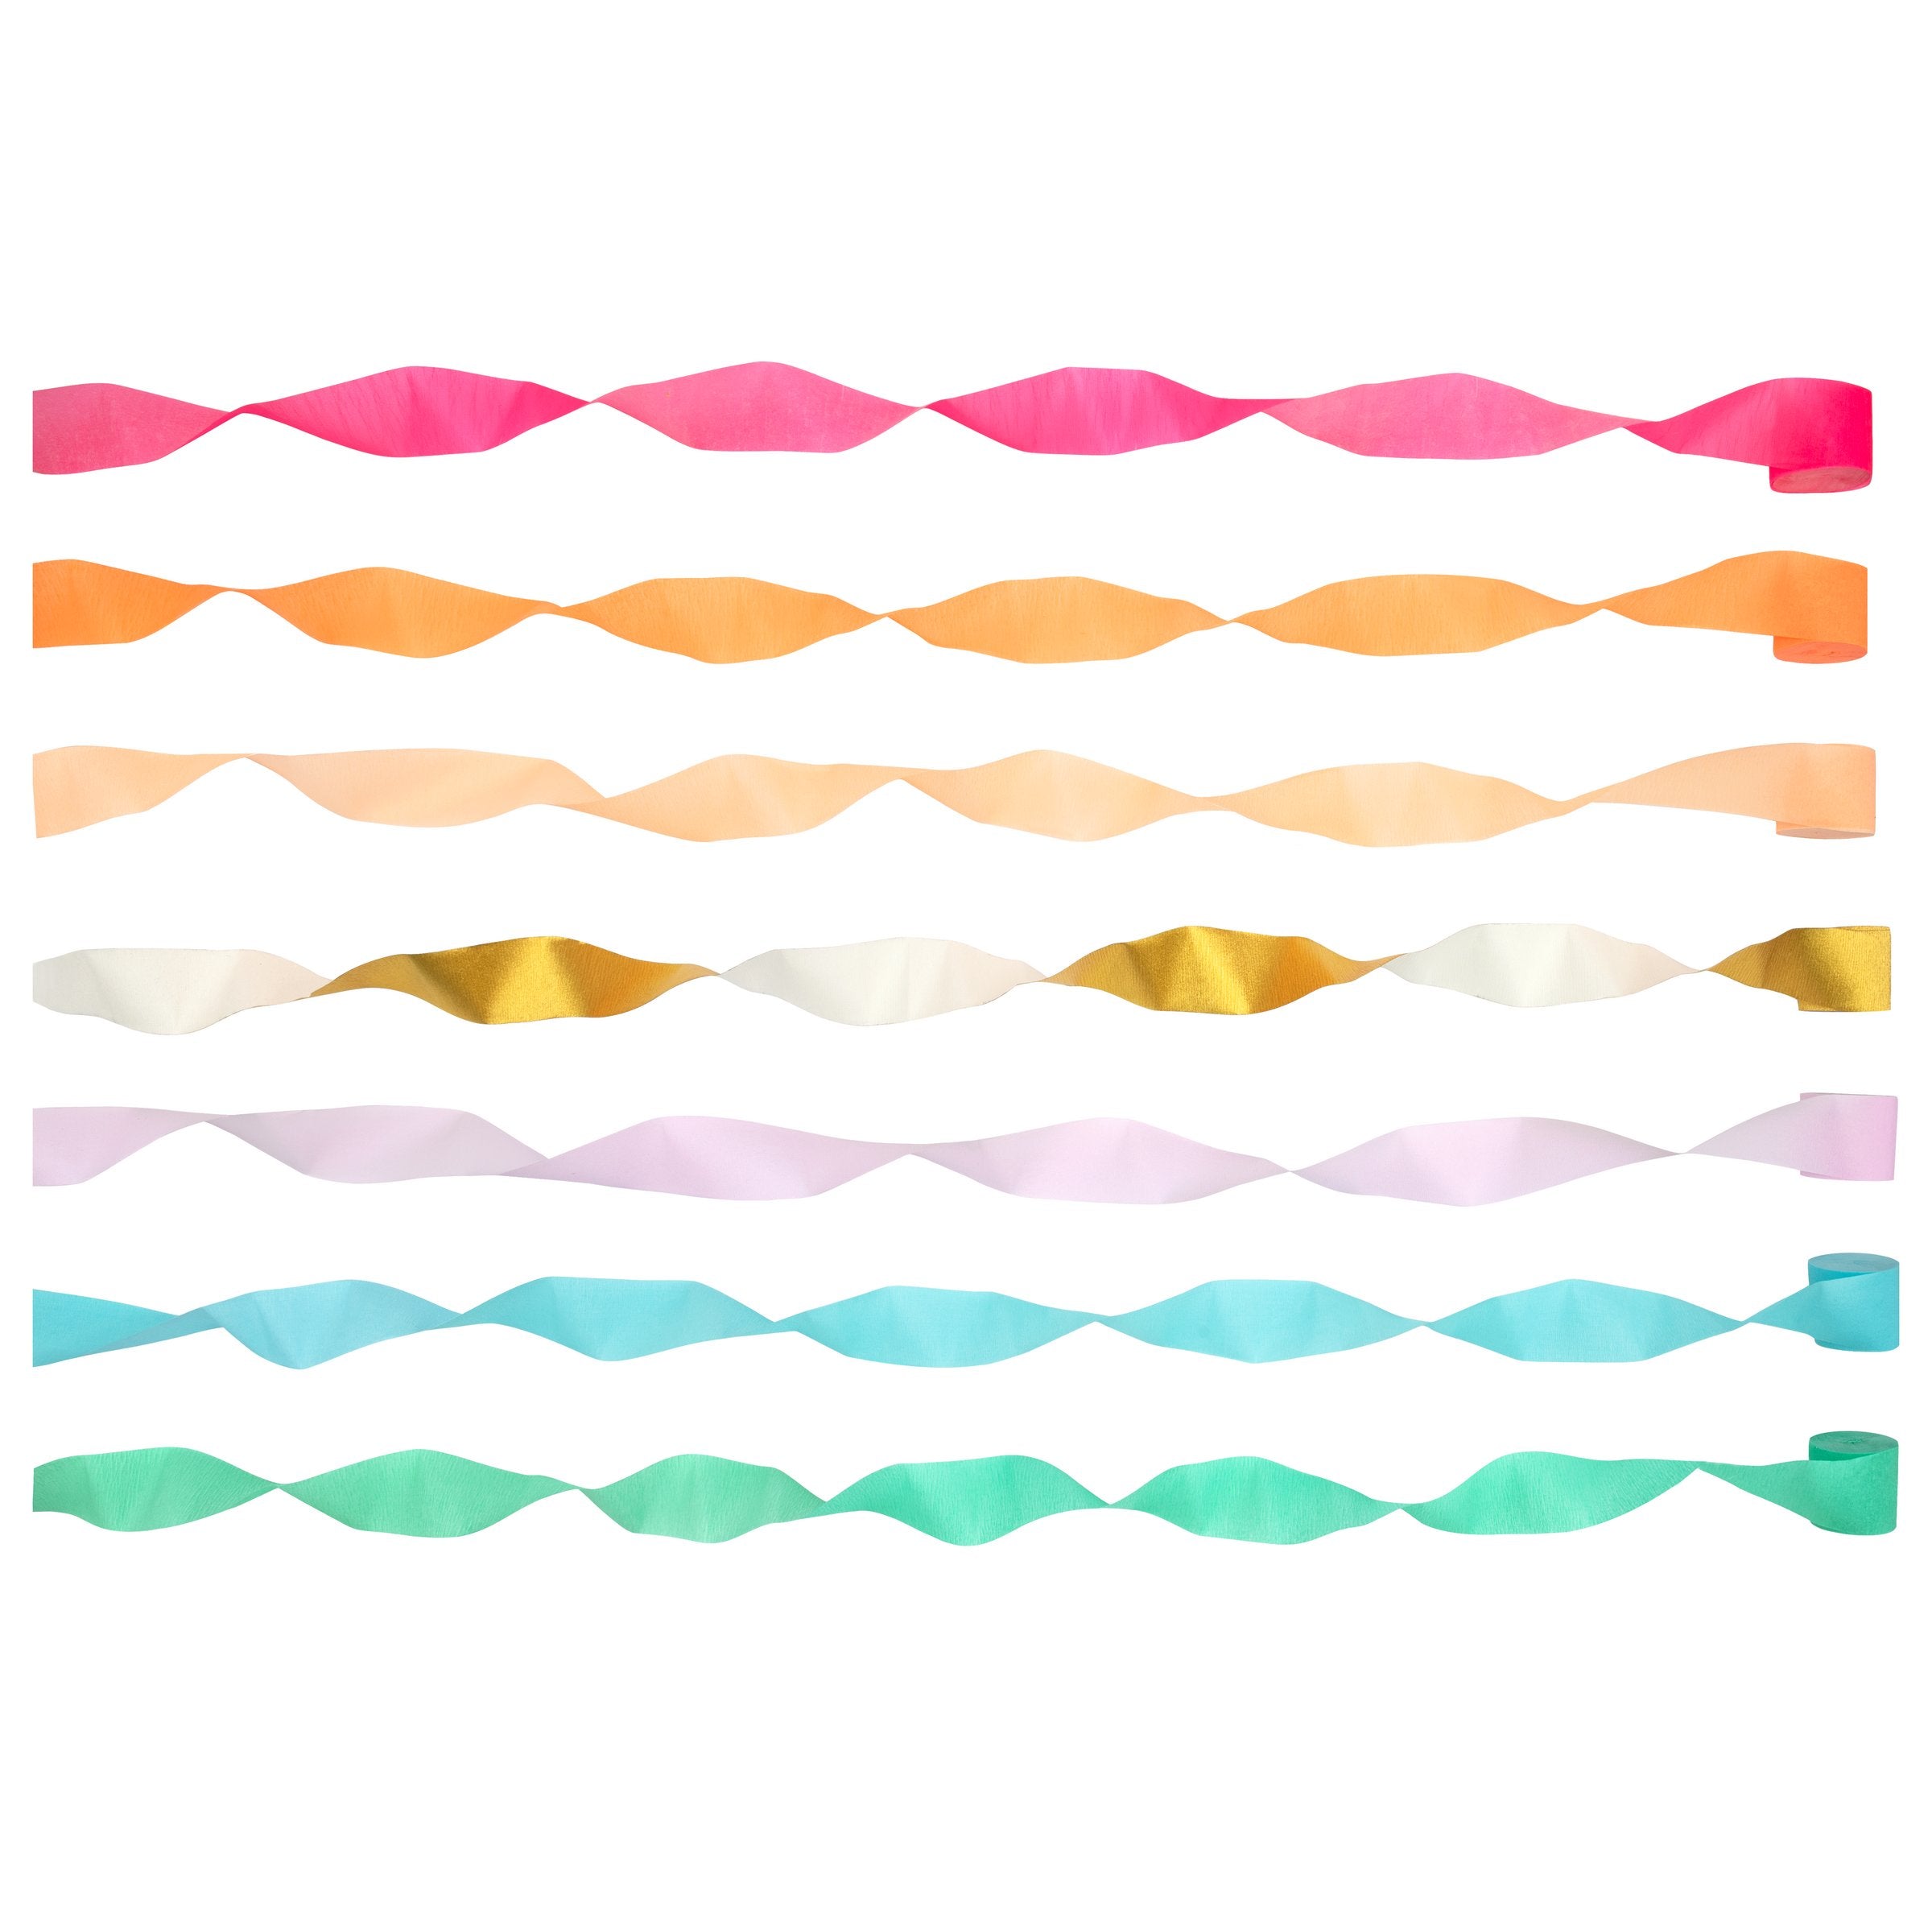 Our streamers are crafted from crepe paper in neon and gold, perfect for paper party decorations.